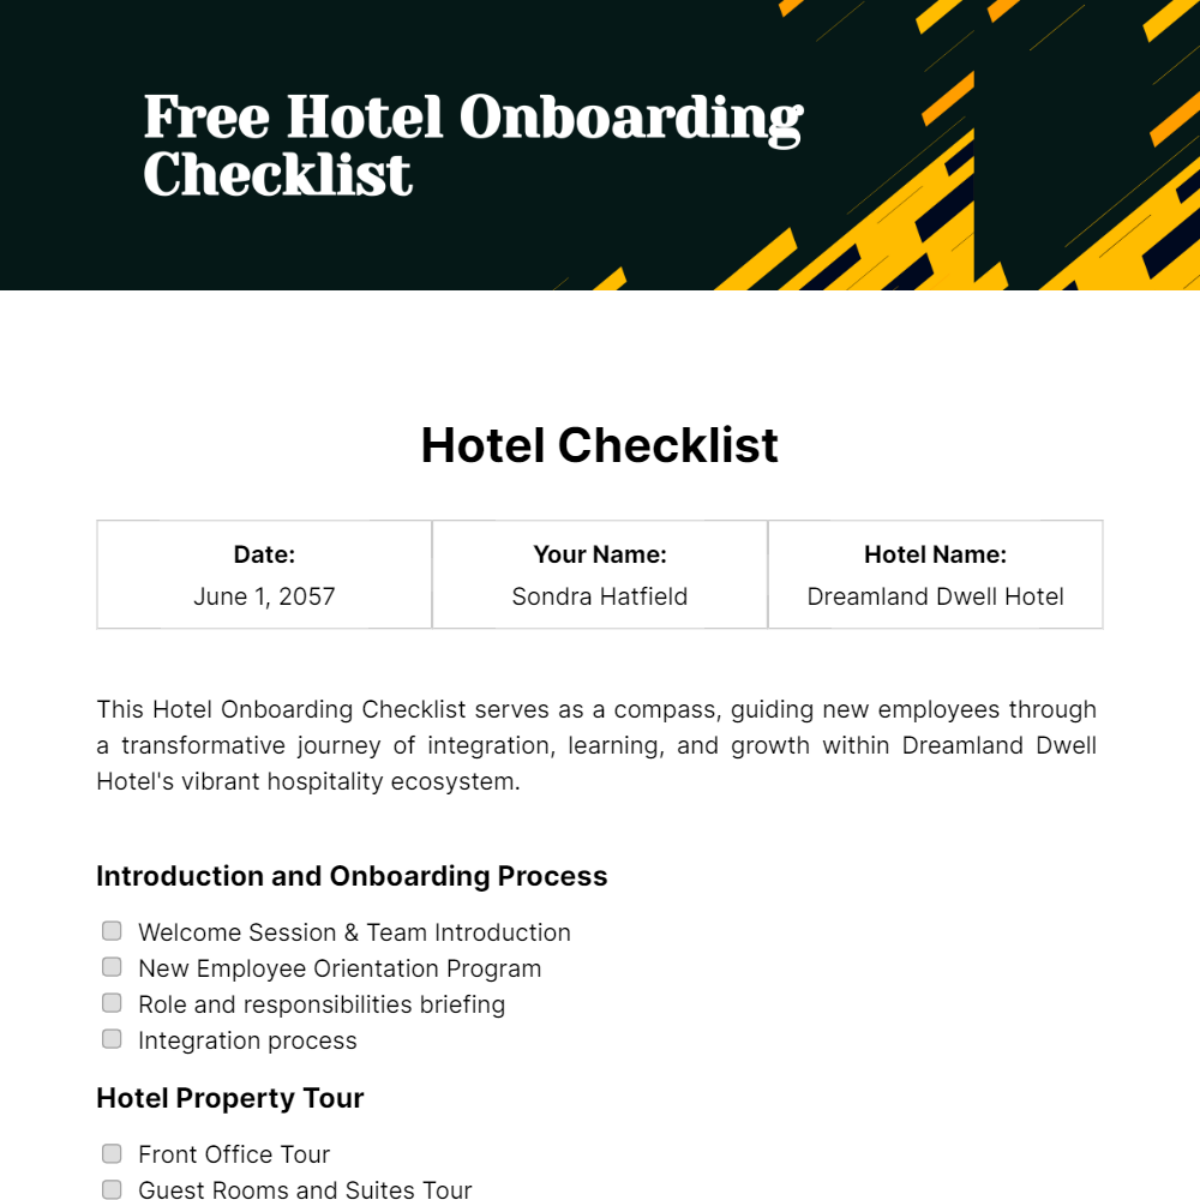 Free Hotel Onboarding Checklist Template